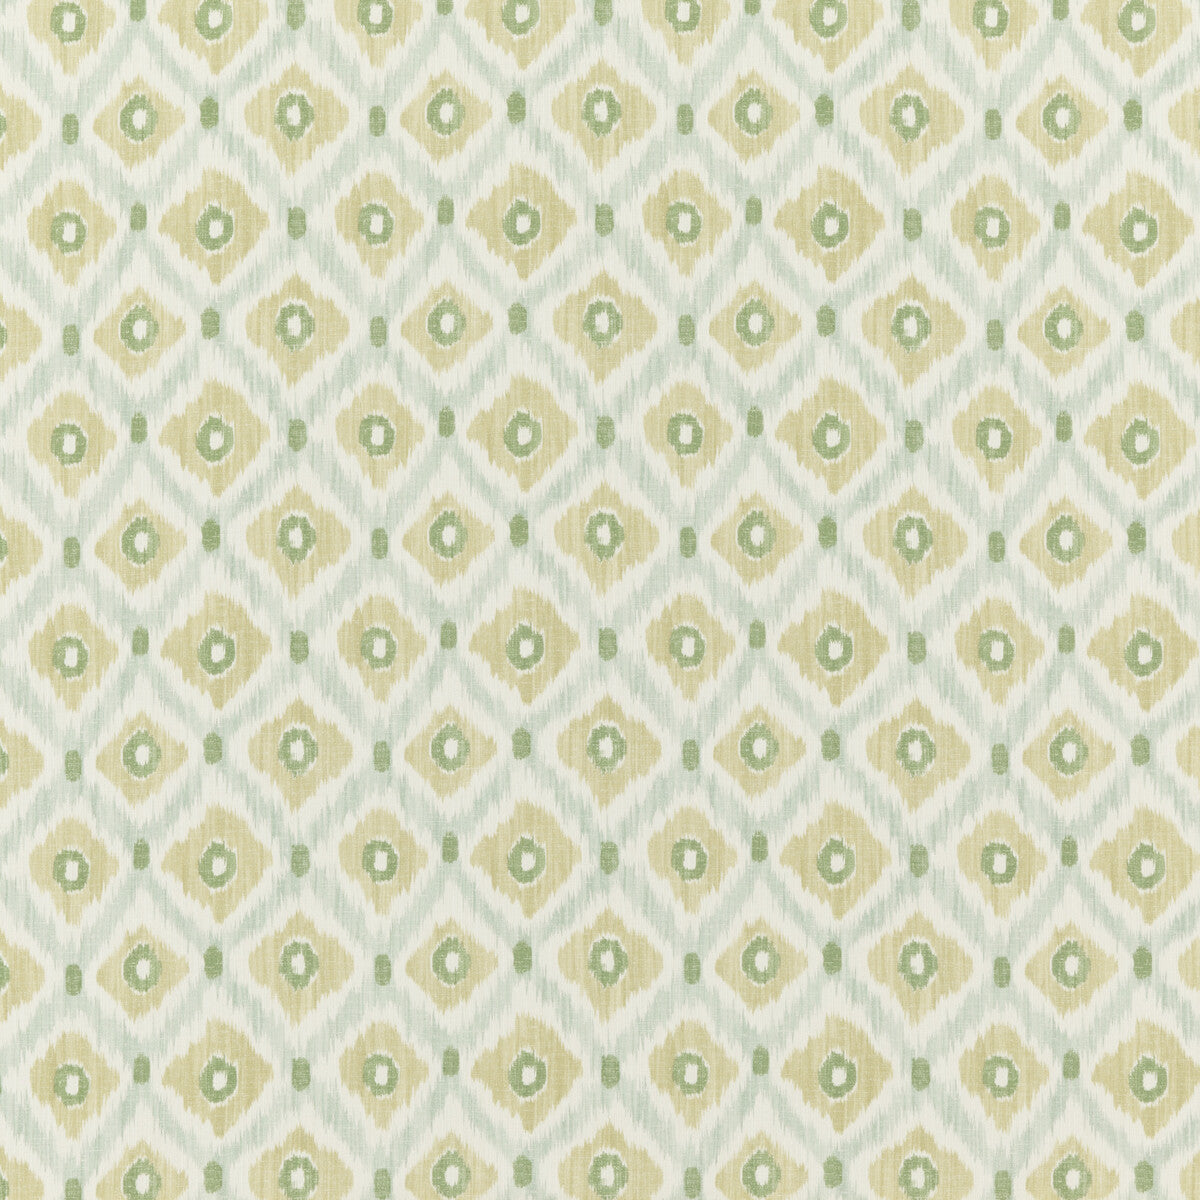 Vasco fabric in aqua color - pattern PP50448.4.0 - by Baker Lifestyle in the Homes &amp; Gardens III collection